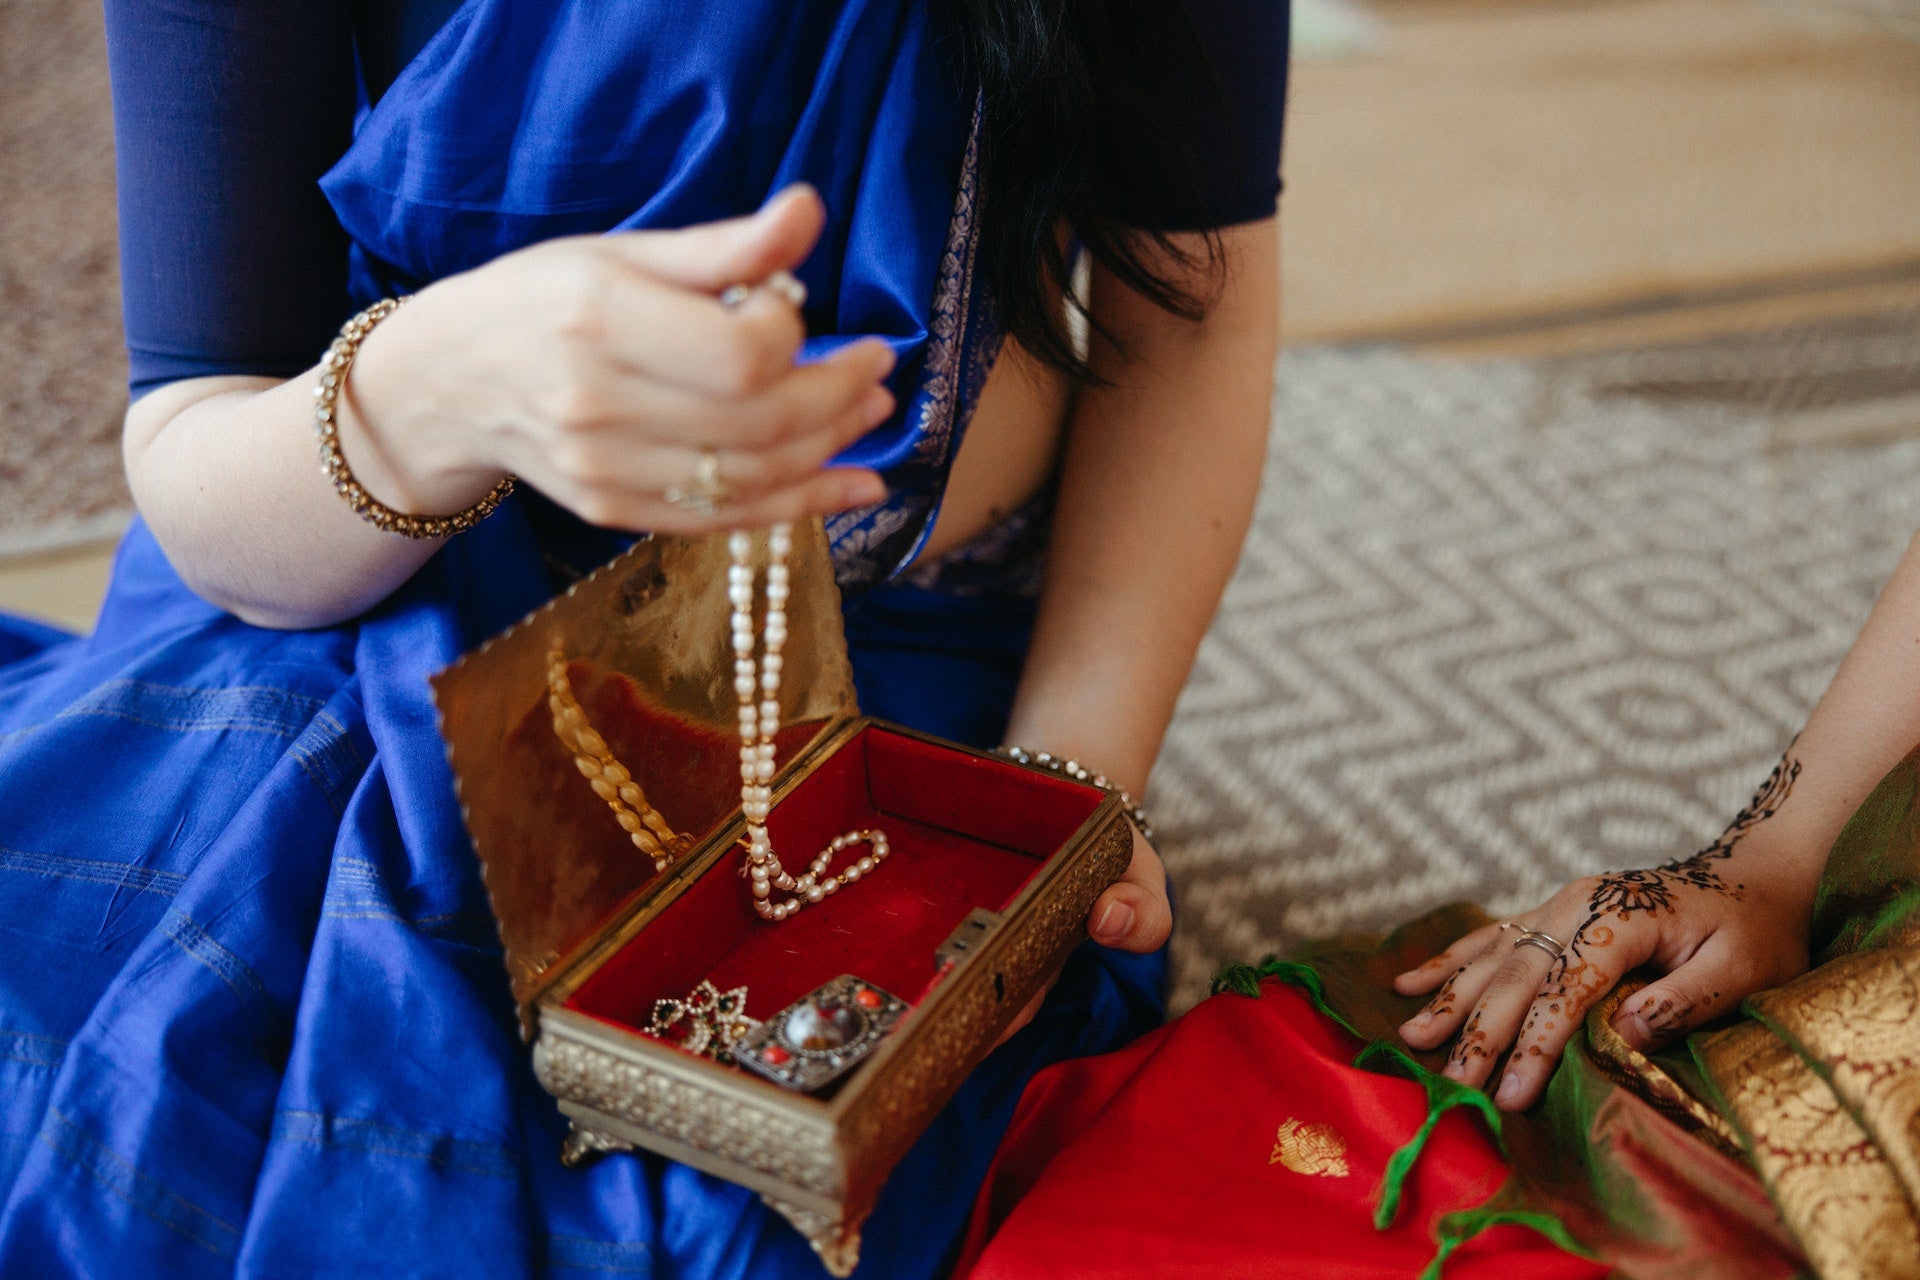 A woman goes through a jewelry box